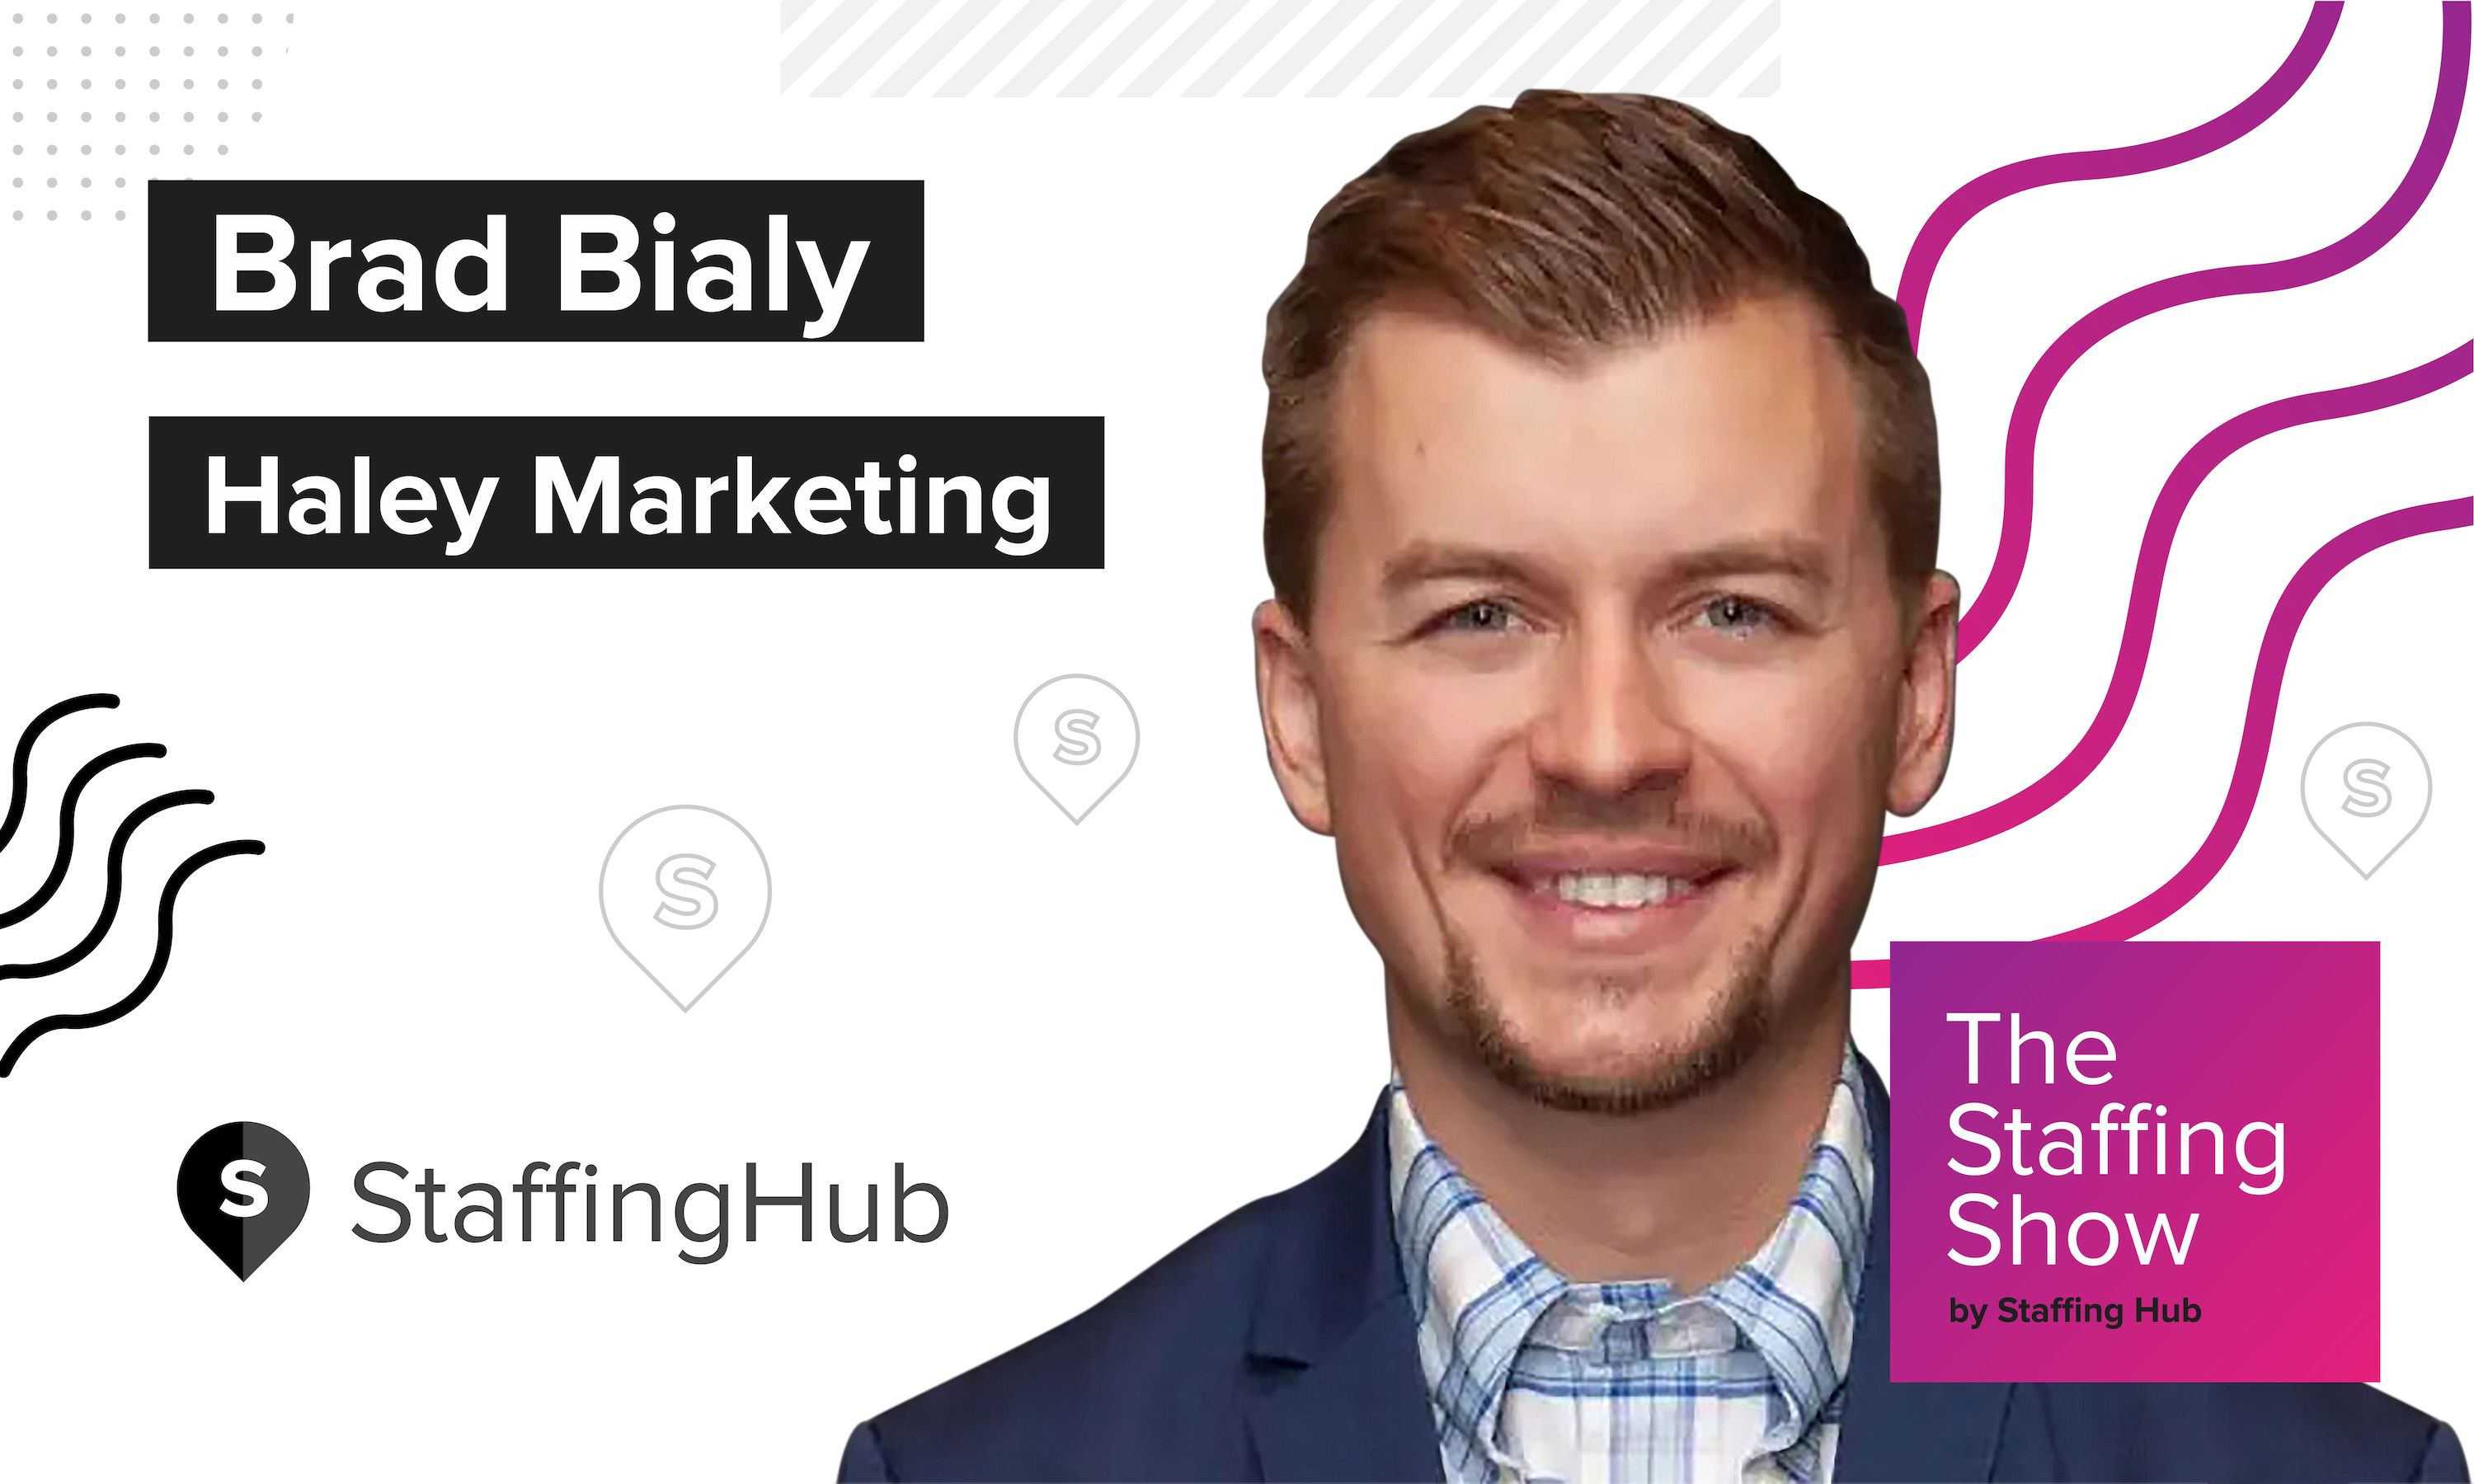 Brad Bialy of Haley Marketing on What the Staffing Industry Can Learn From Professional Sports, Entertainment, and the Largest Online Marketplaces